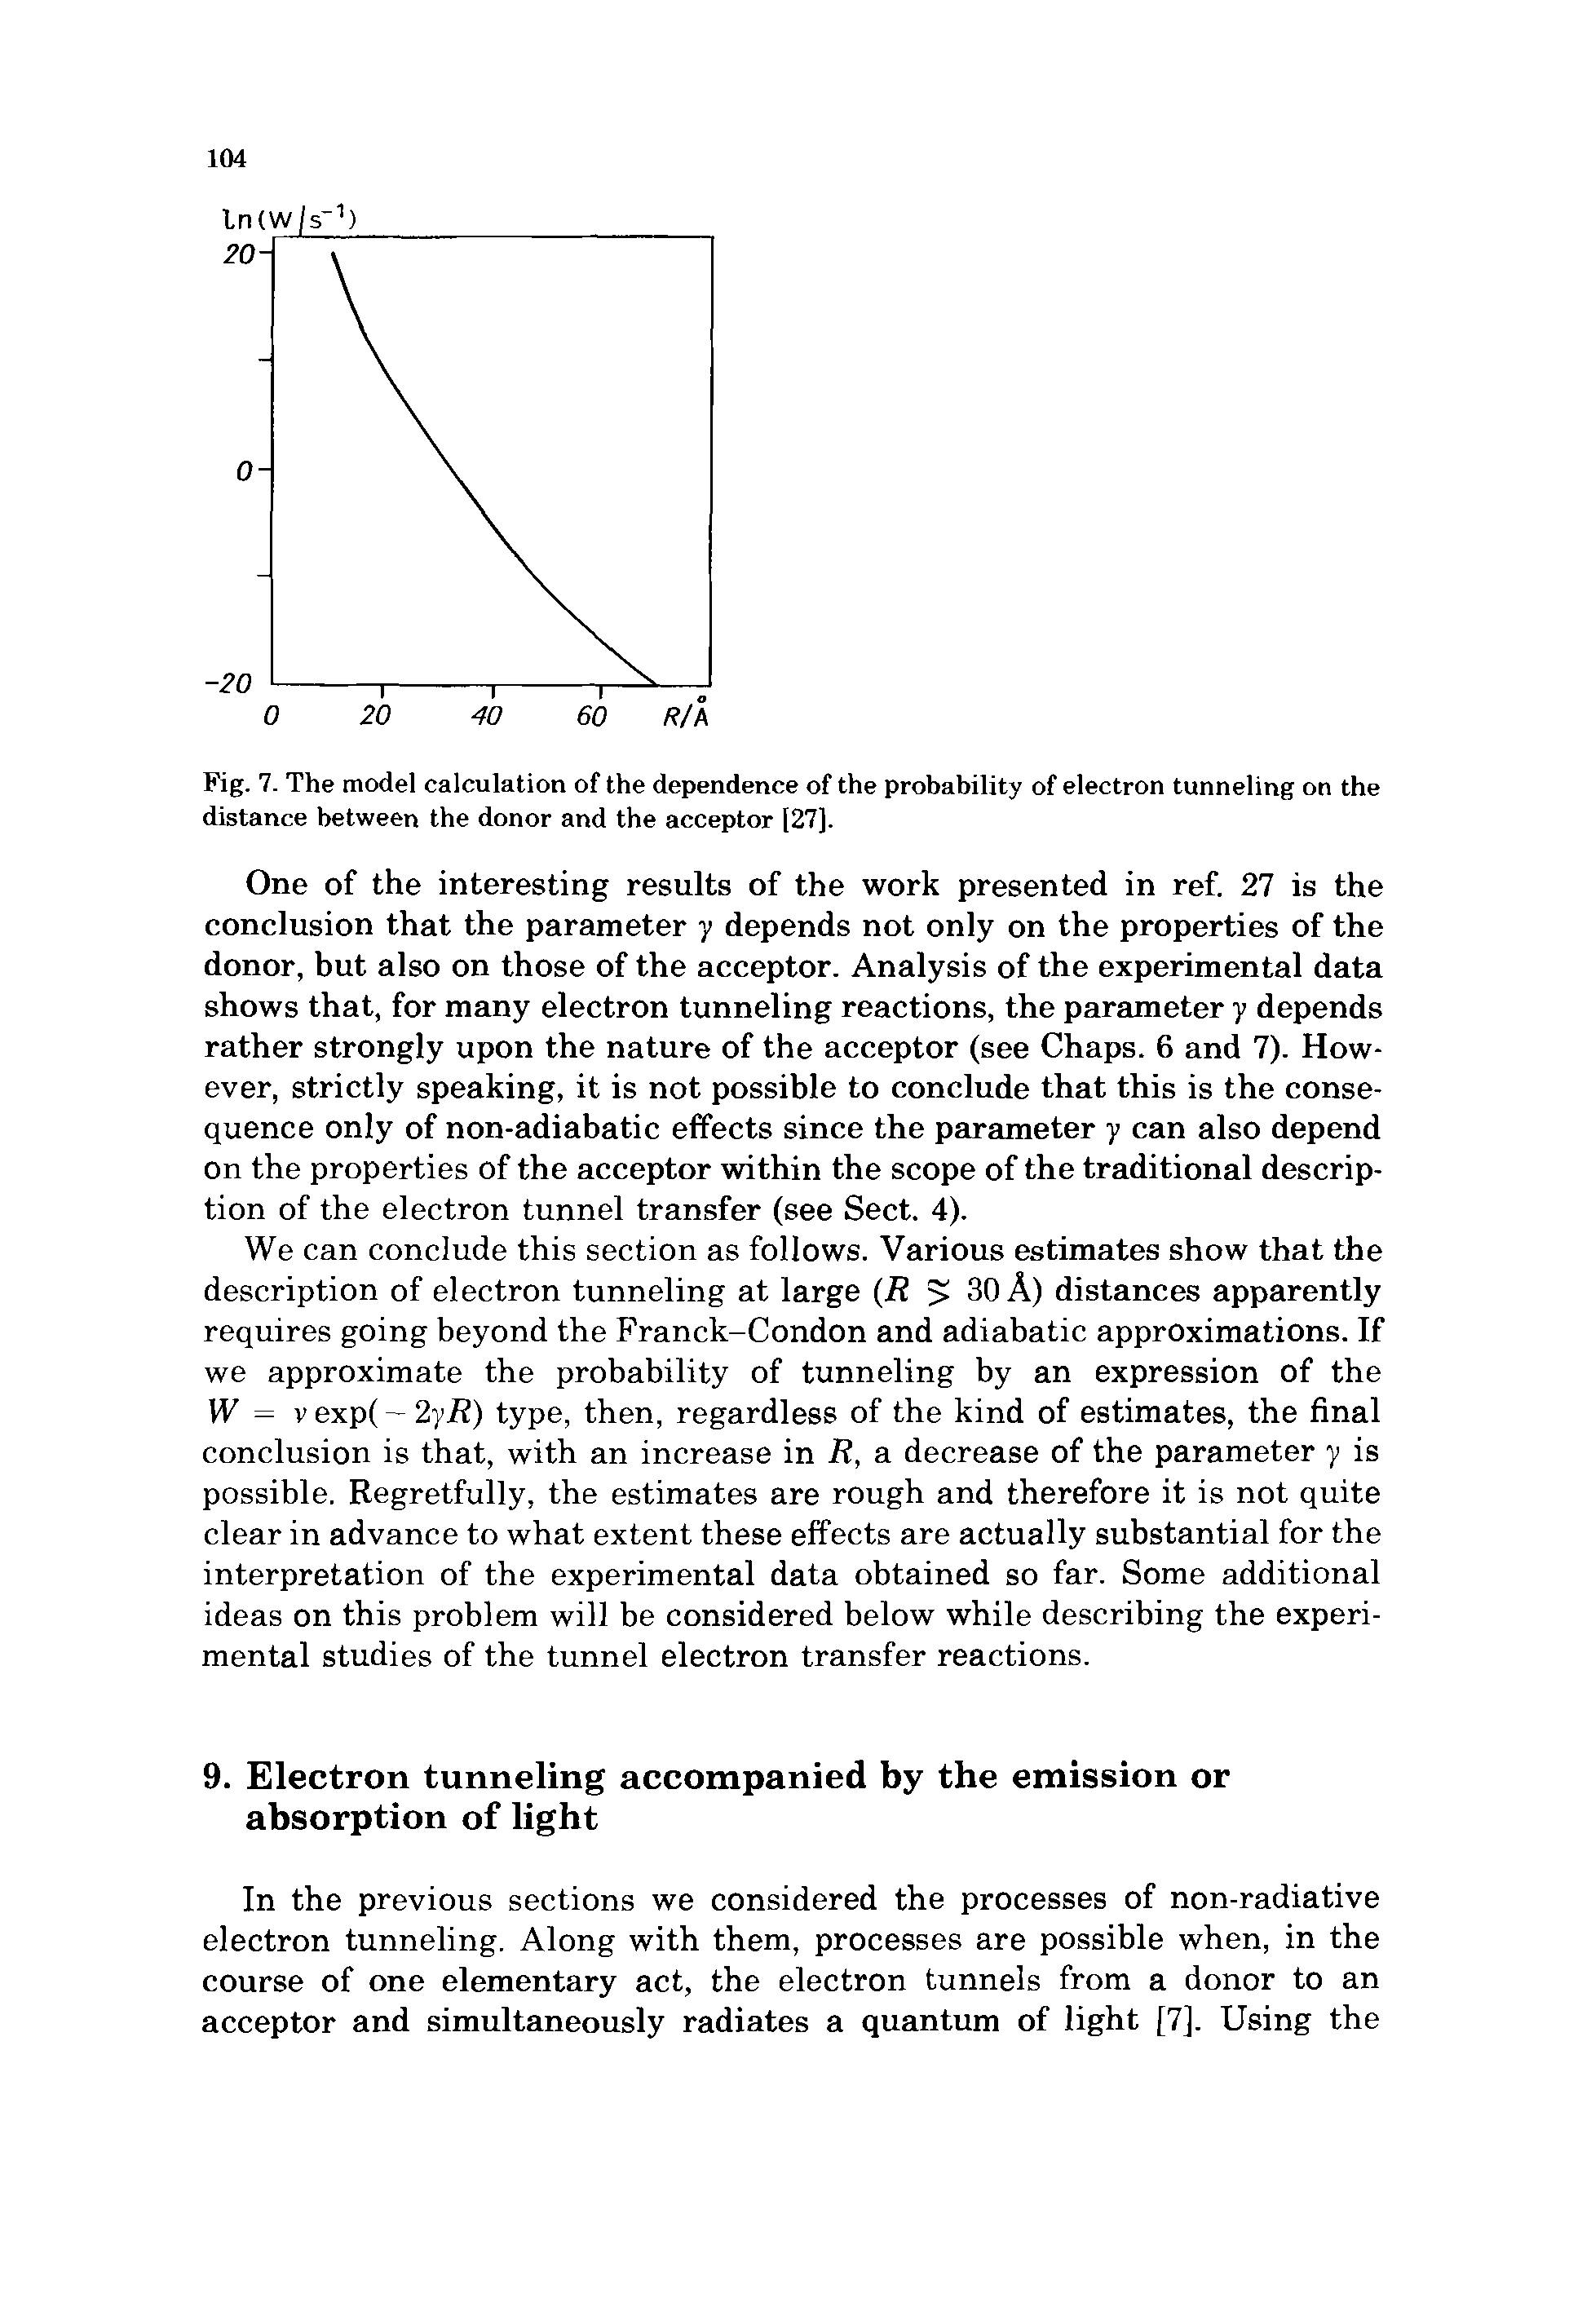 Fig. 7. The model calculation of the dependence of the probability of electron tunneling on the distance between the donor and the acceptor [27].